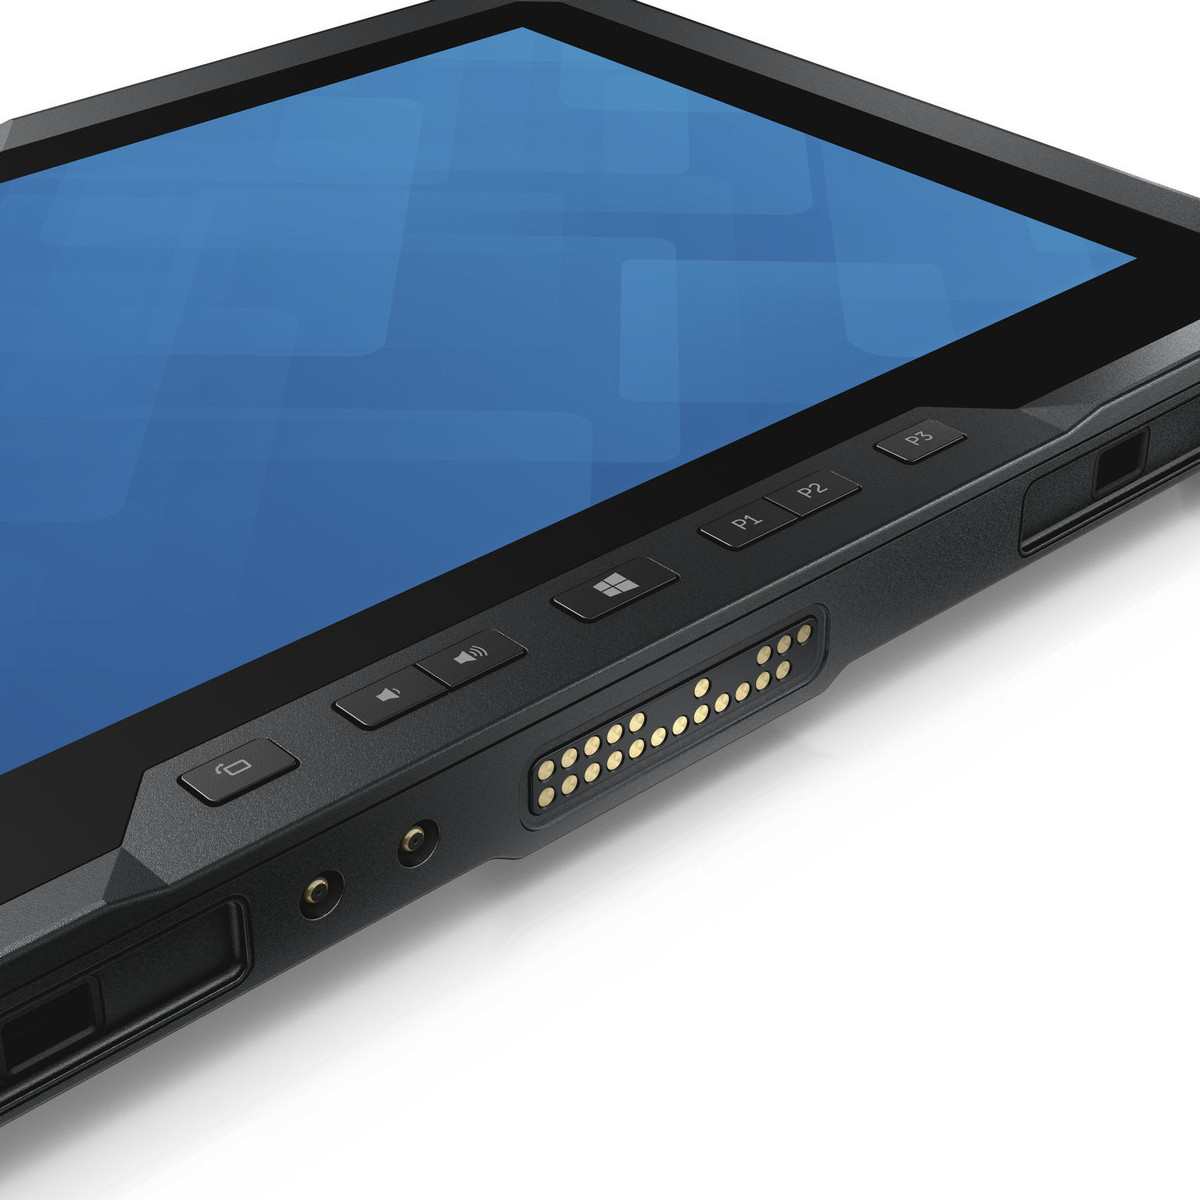 Dell launches Latitude 12 Rugged Tablet News